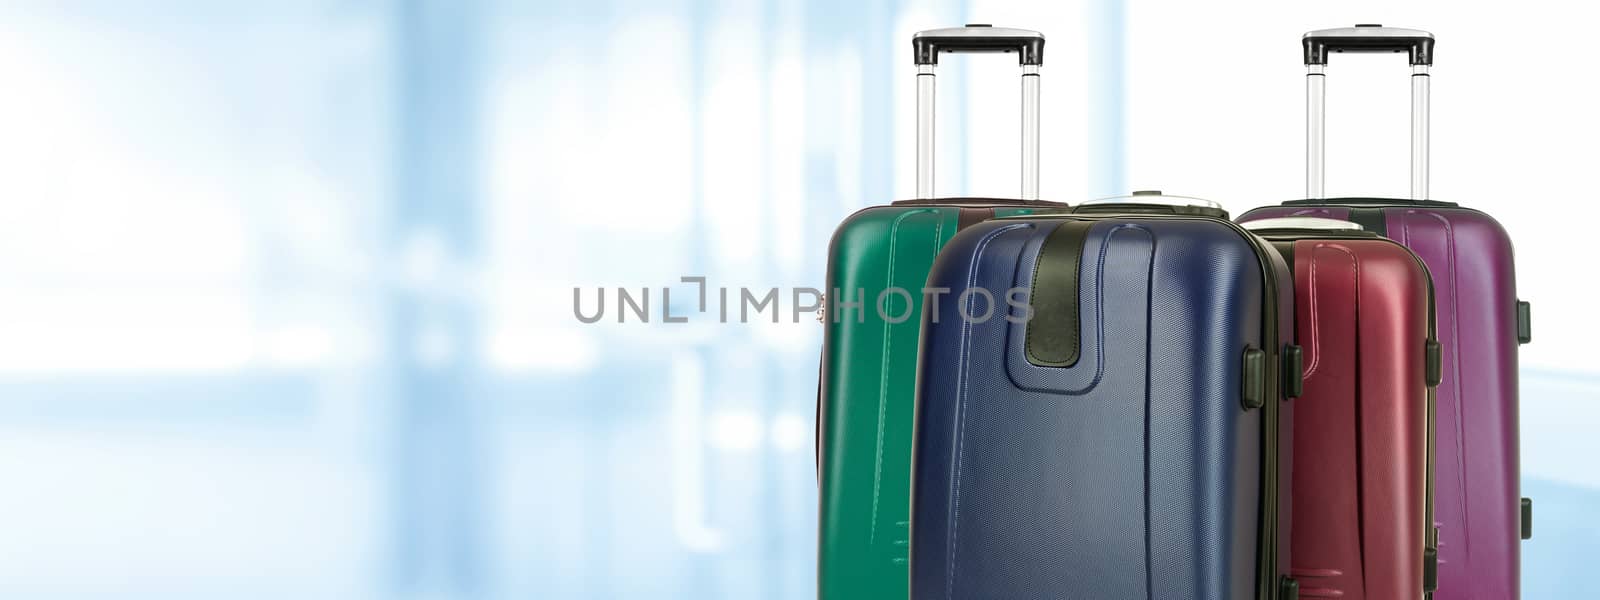 Travel concep banner - group of various travel suitcases on a blurred background of the airport (copy space)